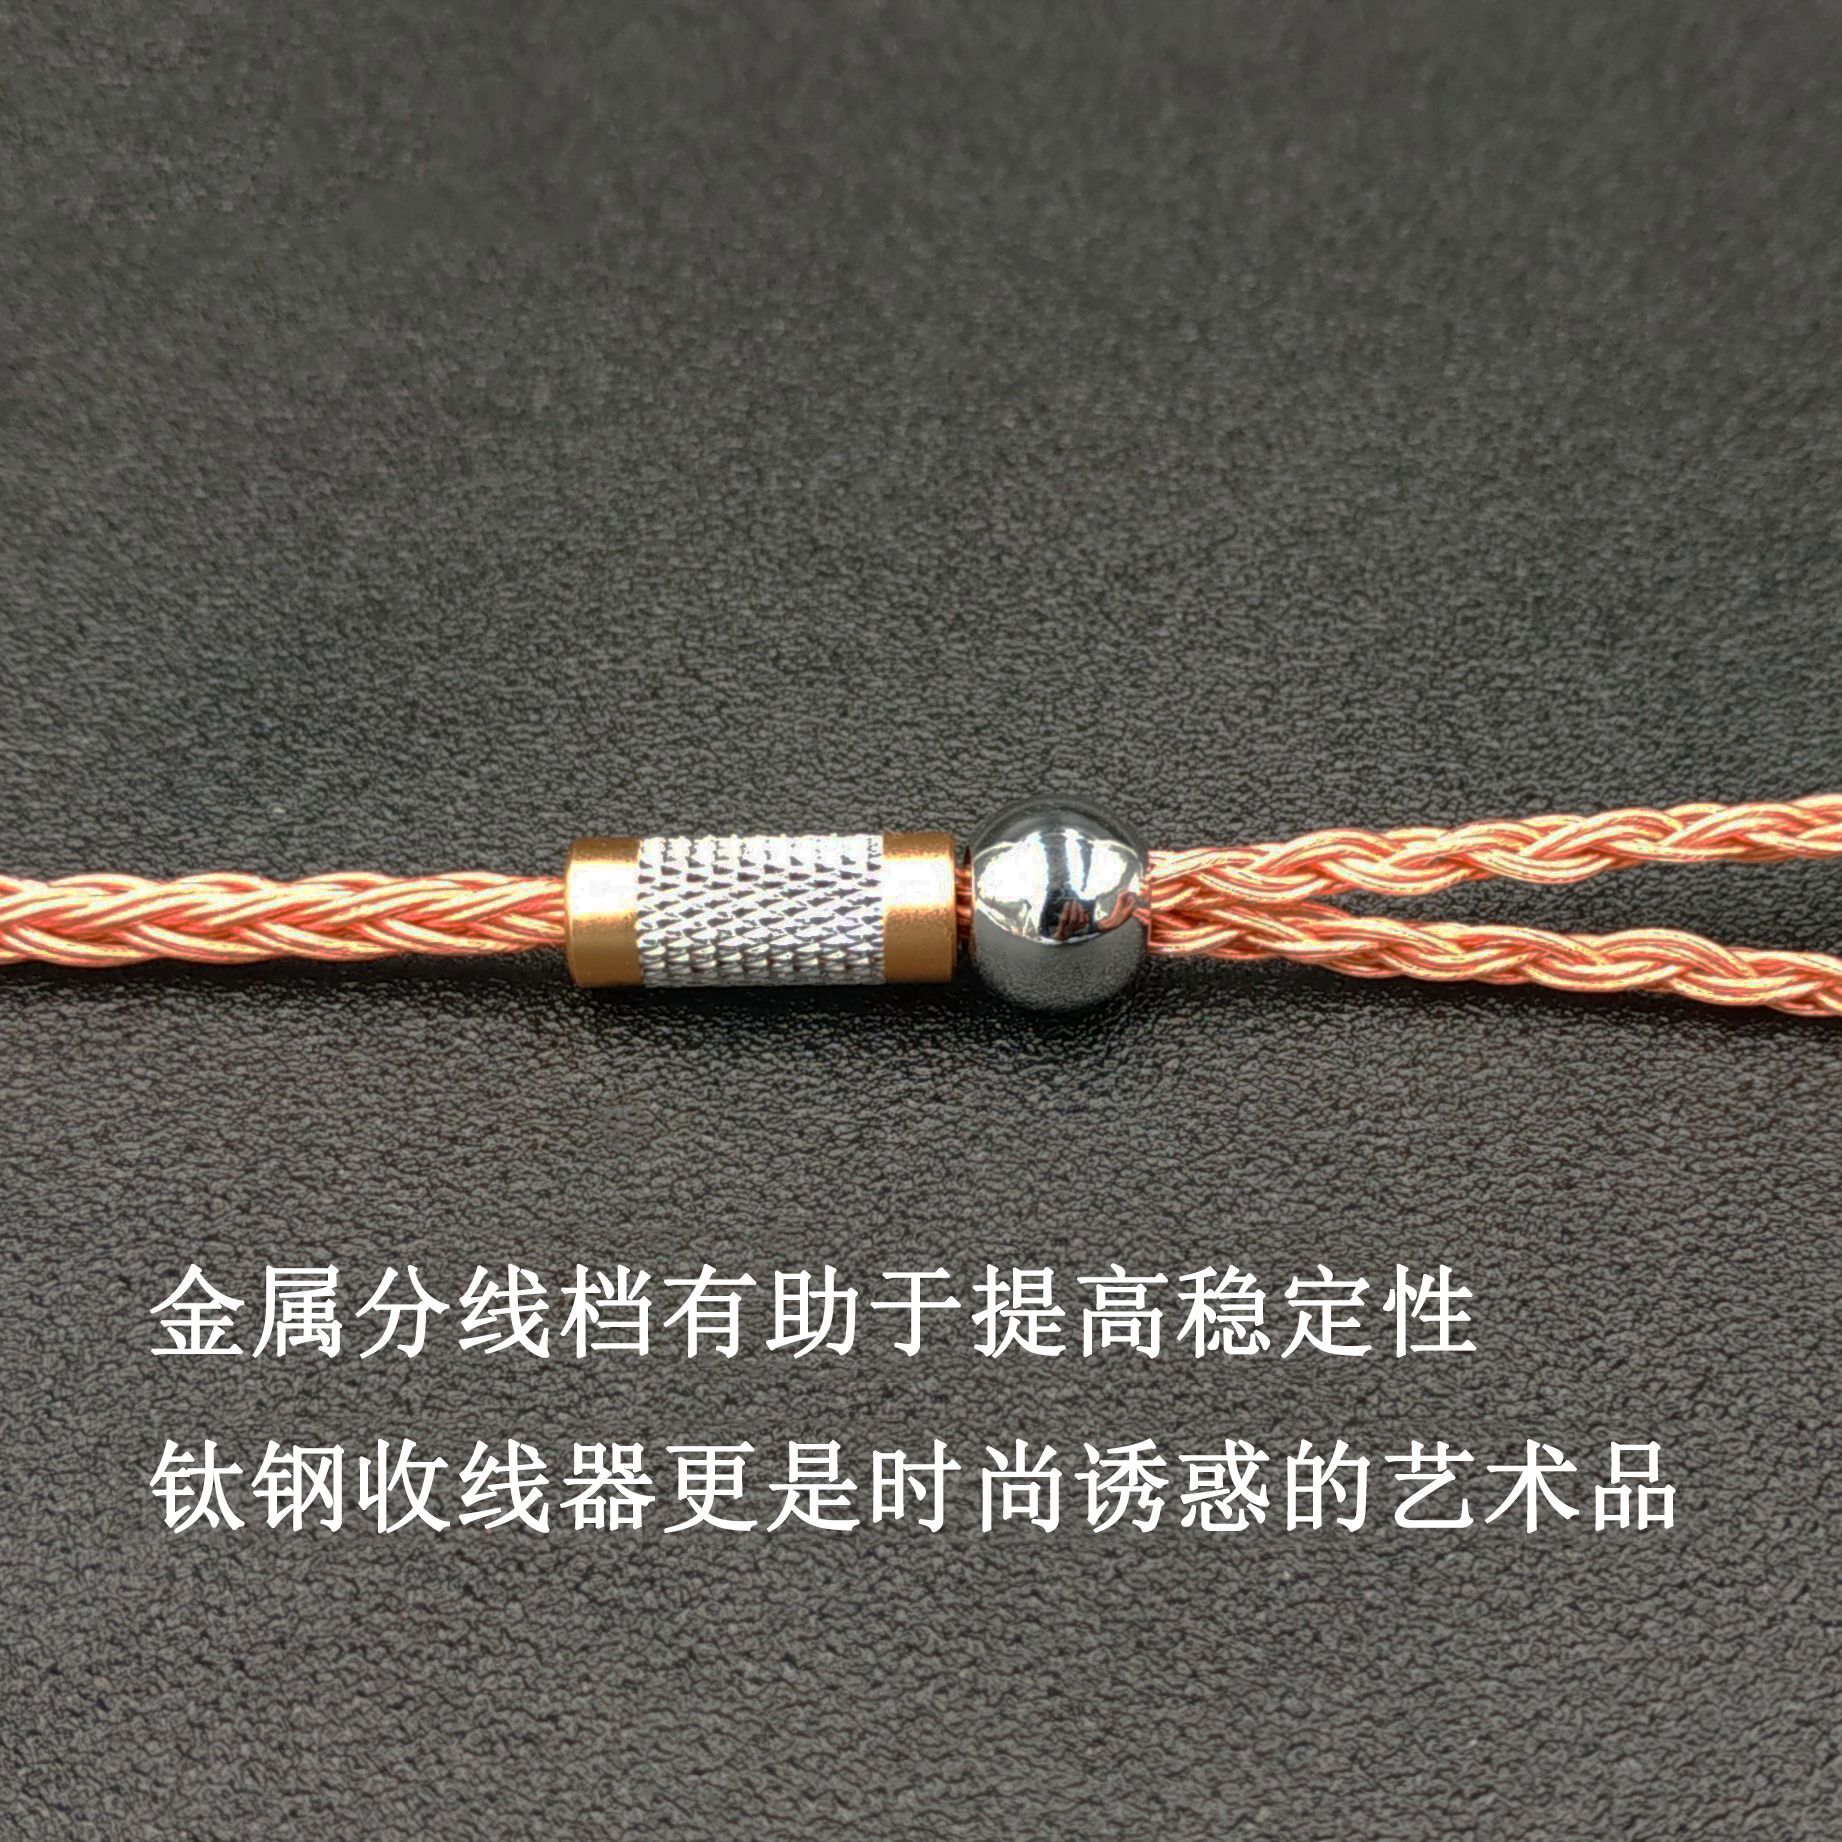 0.78MM 2PIN Mmcx Interface Headphone Cable HiFi Upgrate Audio Cable 0.78mm Earphone Cable  Shure/KZ//TRN /UE /BL03 /BL05